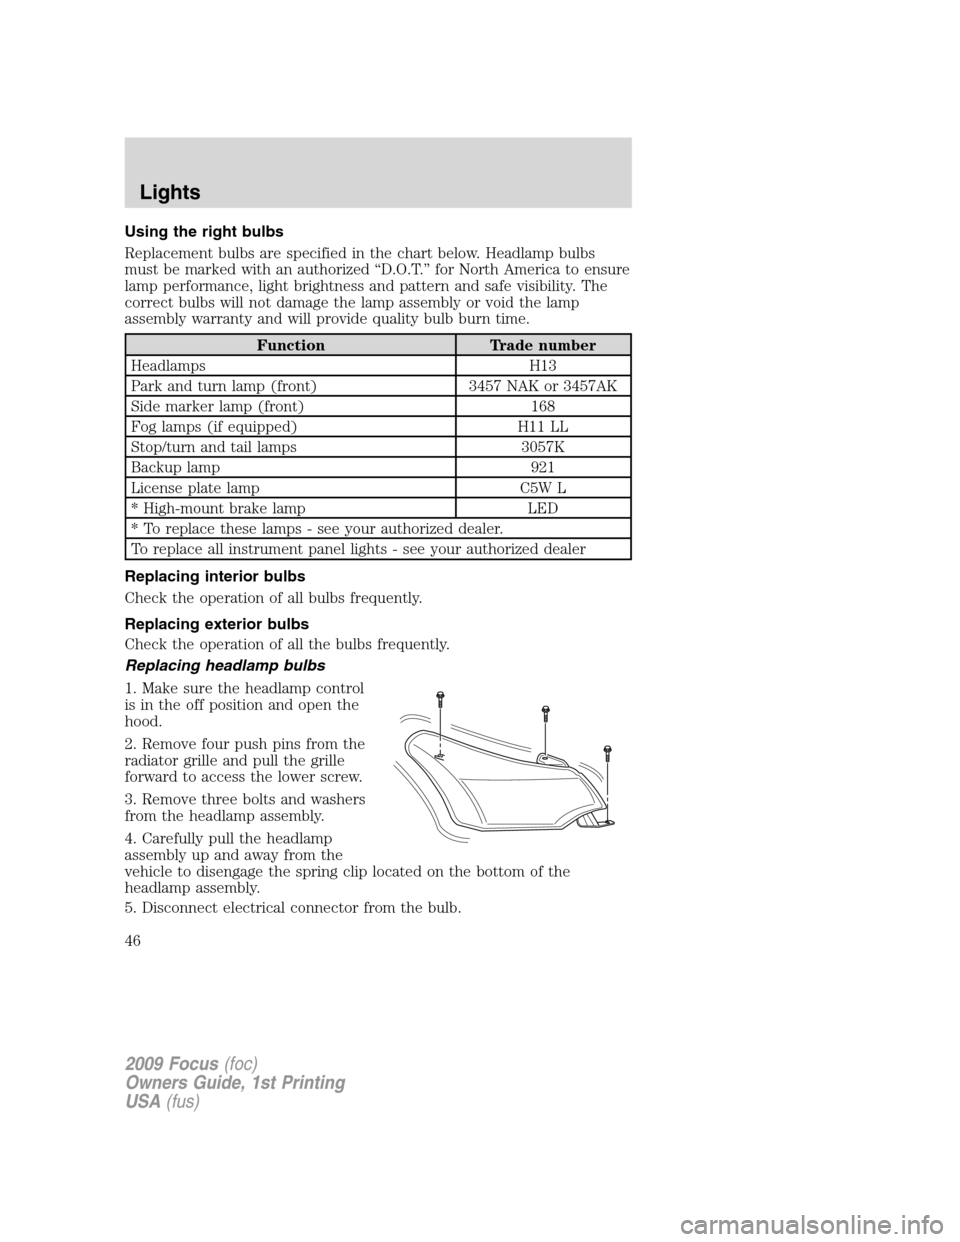 FORD FOCUS 2009 2.G Owners Manual Using the right bulbs
Replacement bulbs are specified in the chart below. Headlamp bulbs
must be marked with an authorized “D.O.T.” for North America to ensure
lamp performance, light brightness a